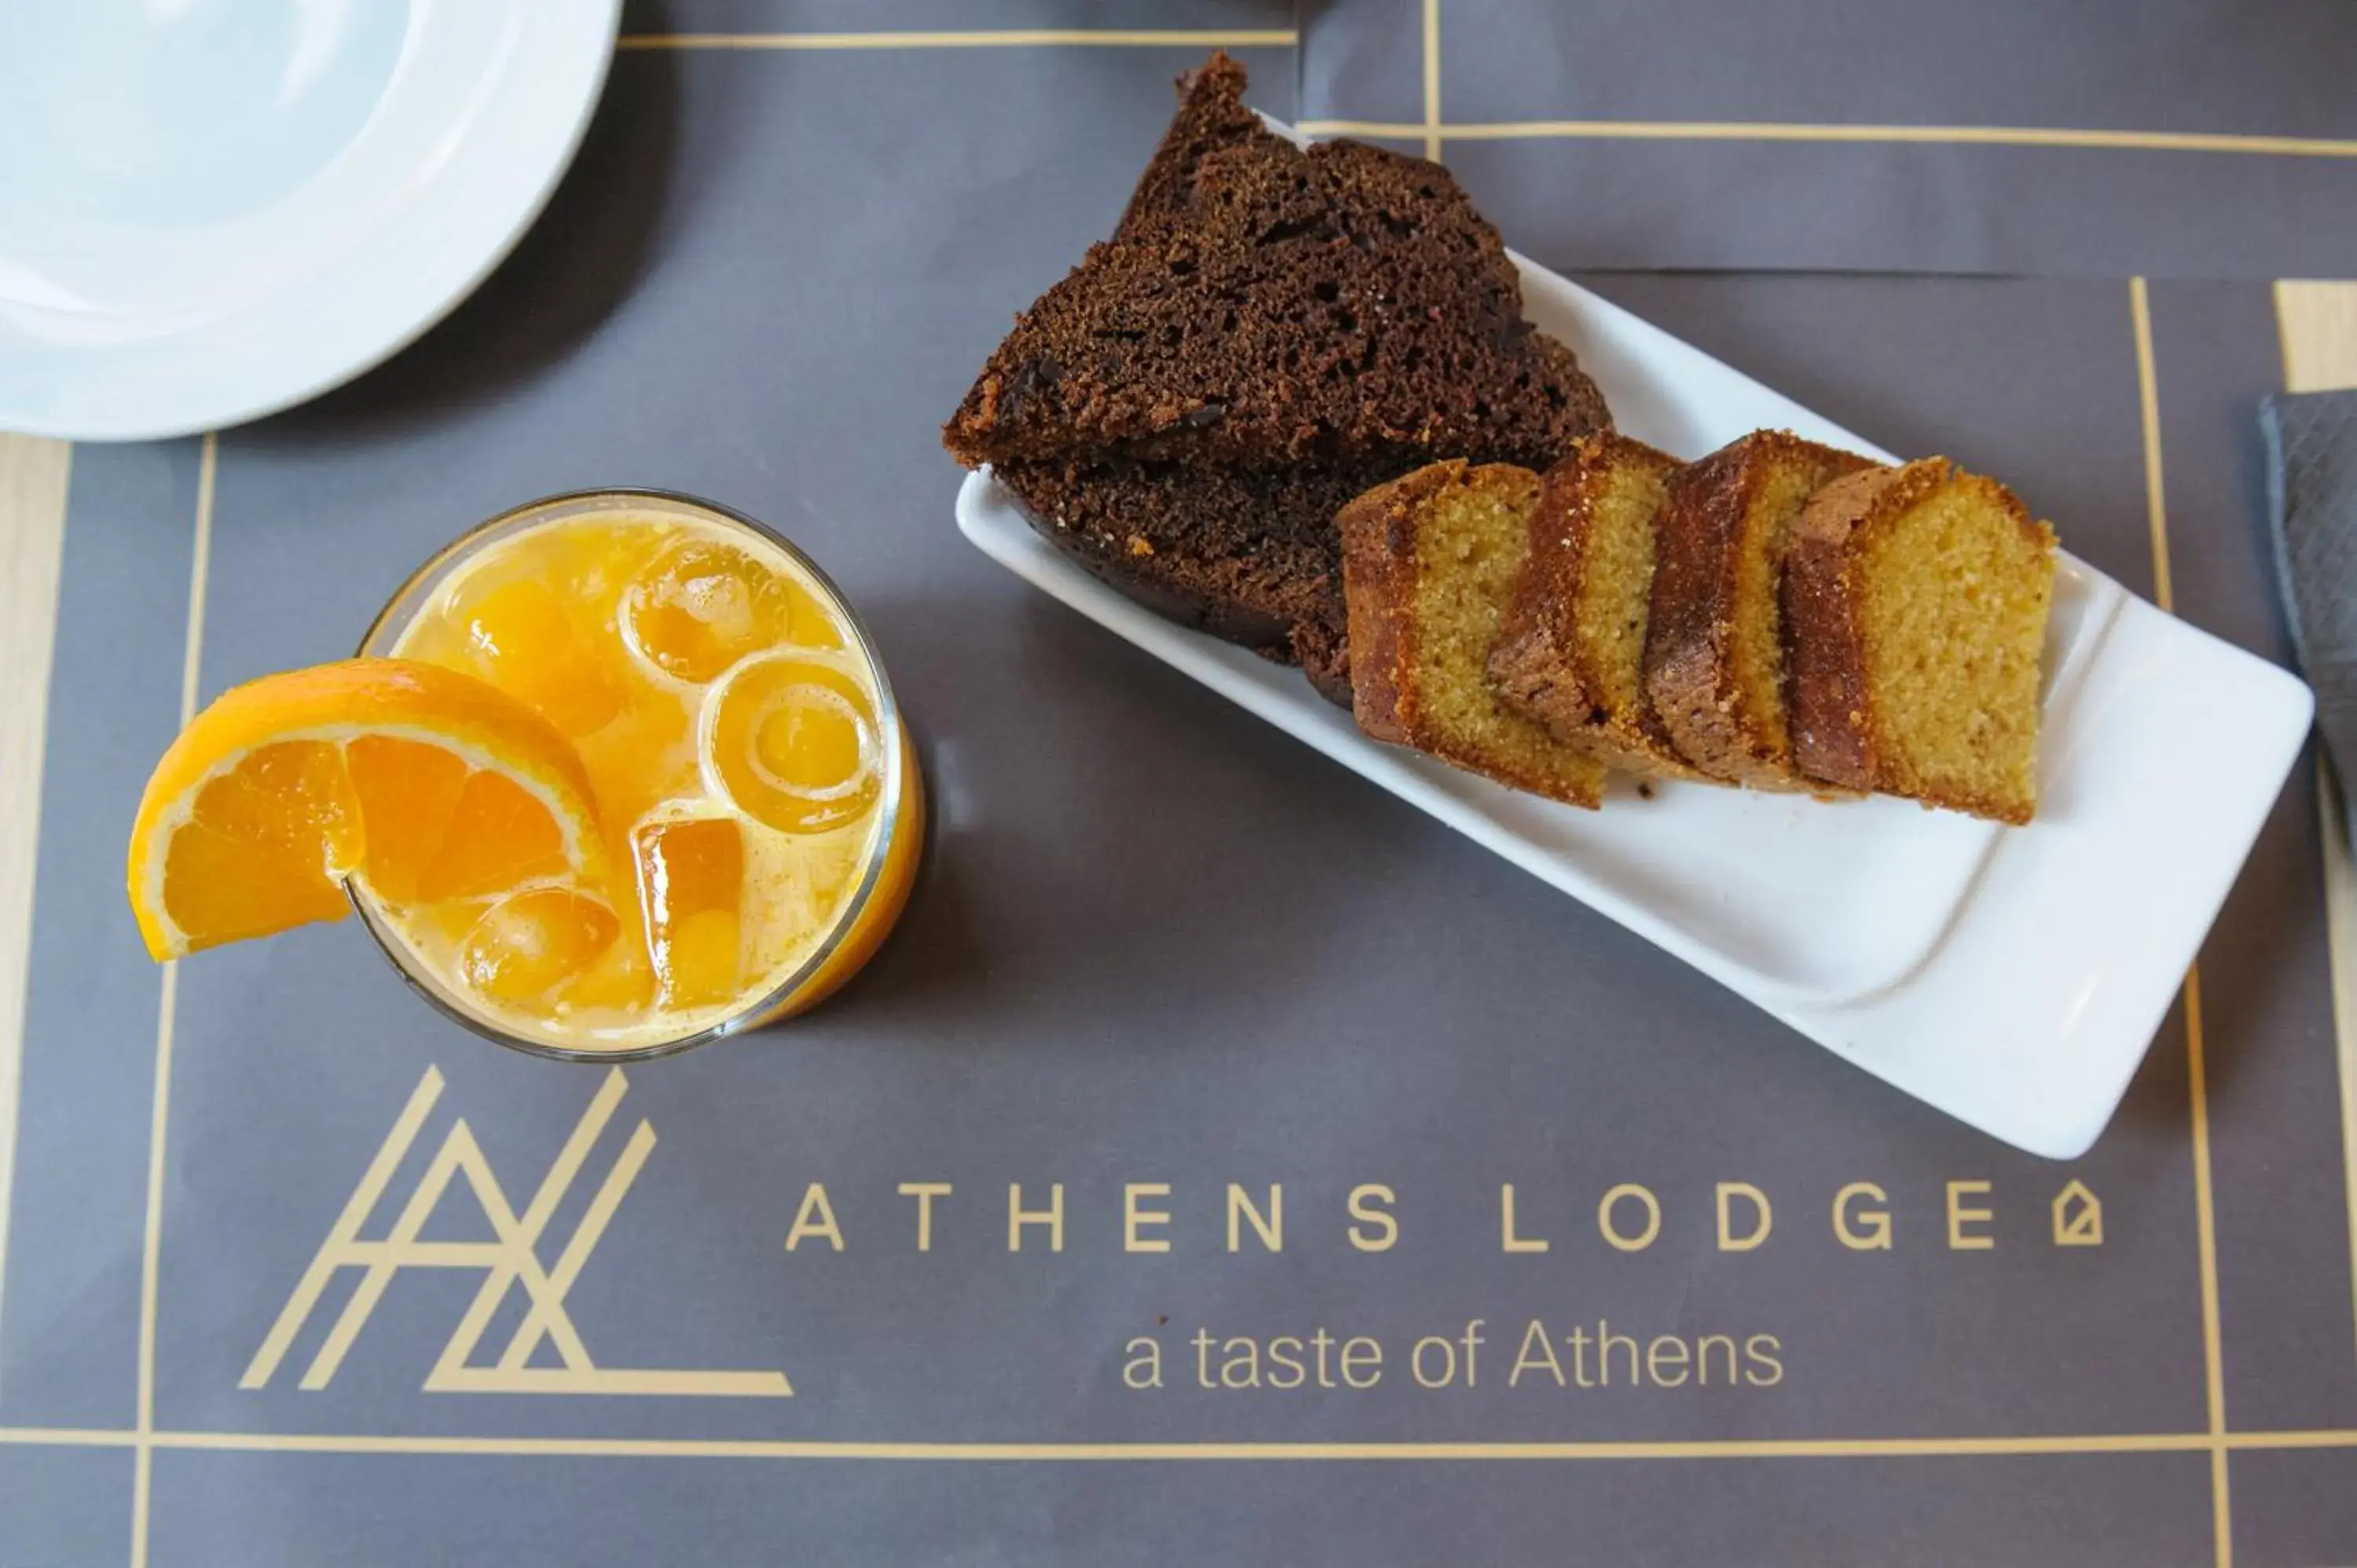 Breakfast in Athens Lodge Boutique Hotel